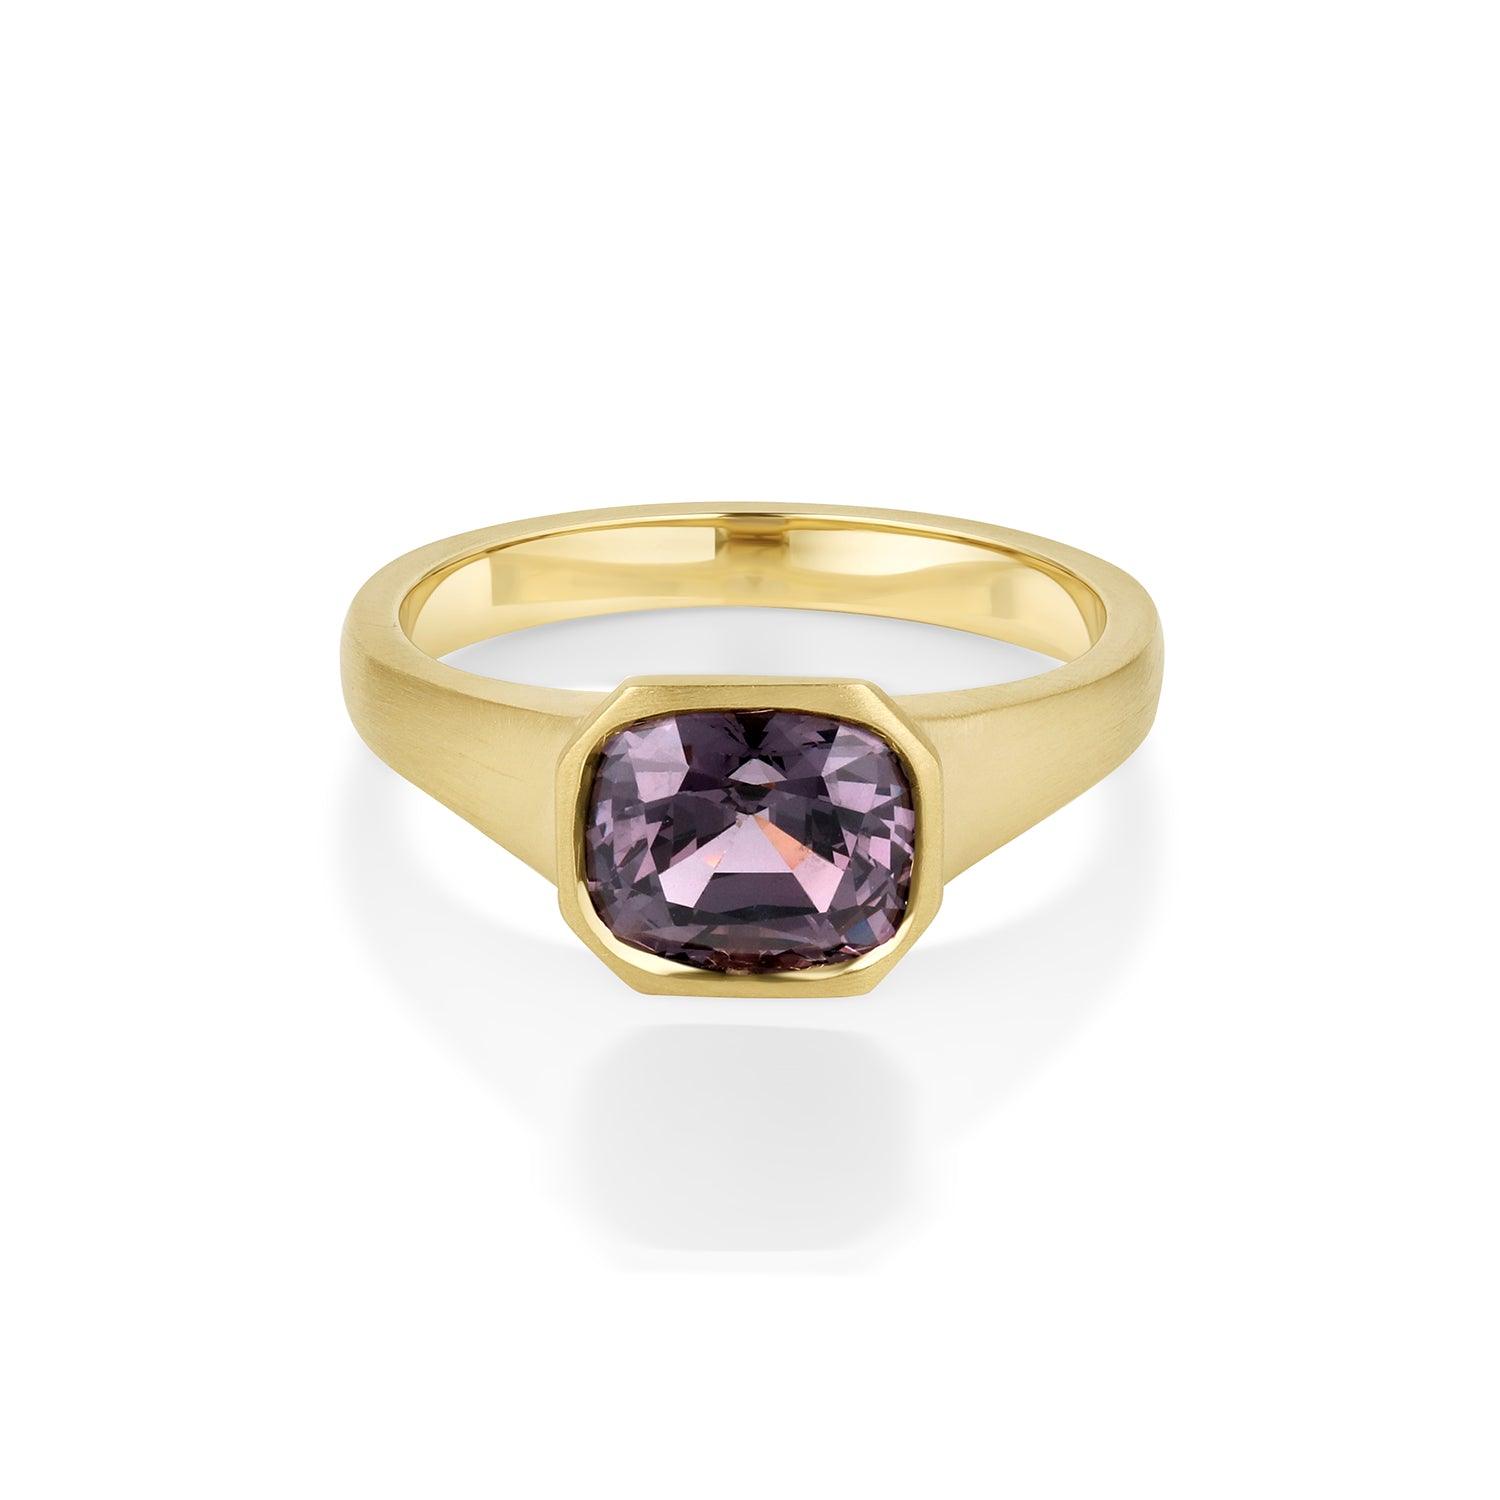 2.79ct Spinel Cushion